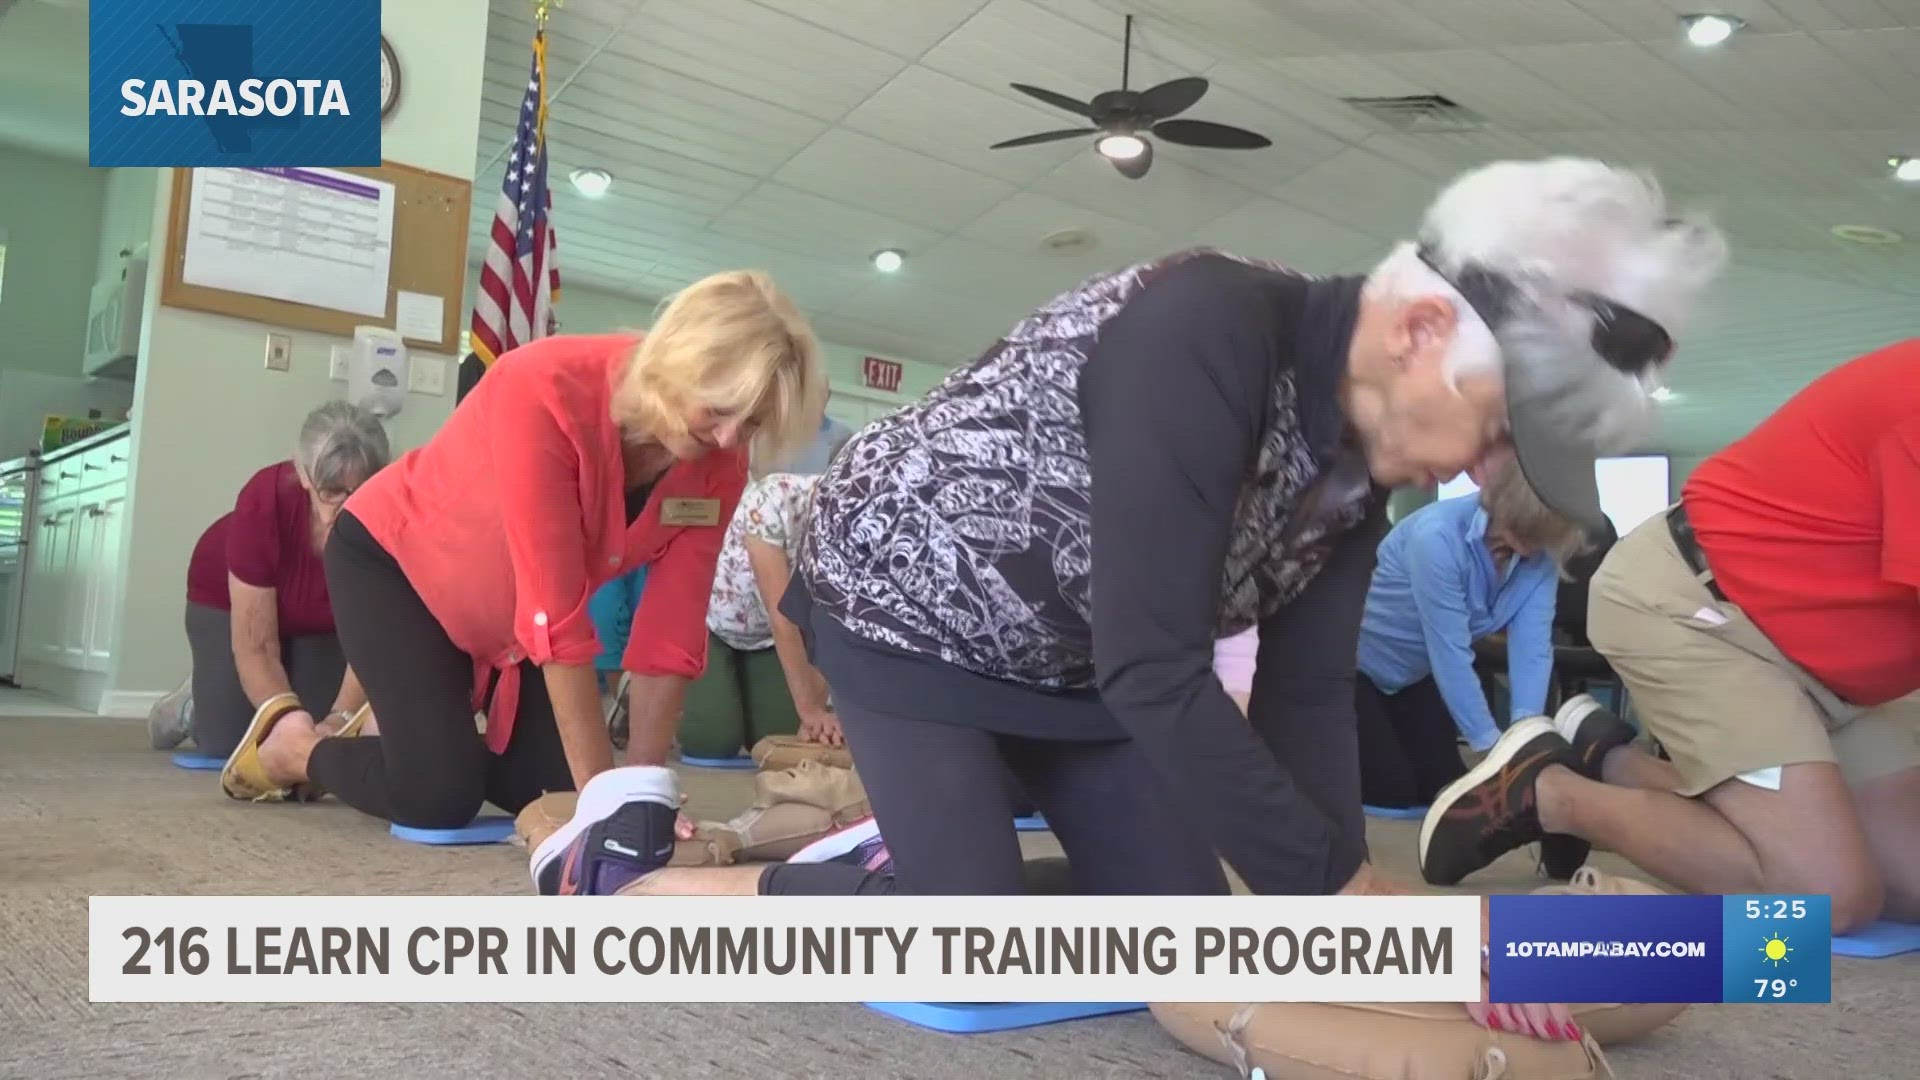 A group of Lakeshore Village neighbors participate in hands-only CPR training program run by Sarasota County.